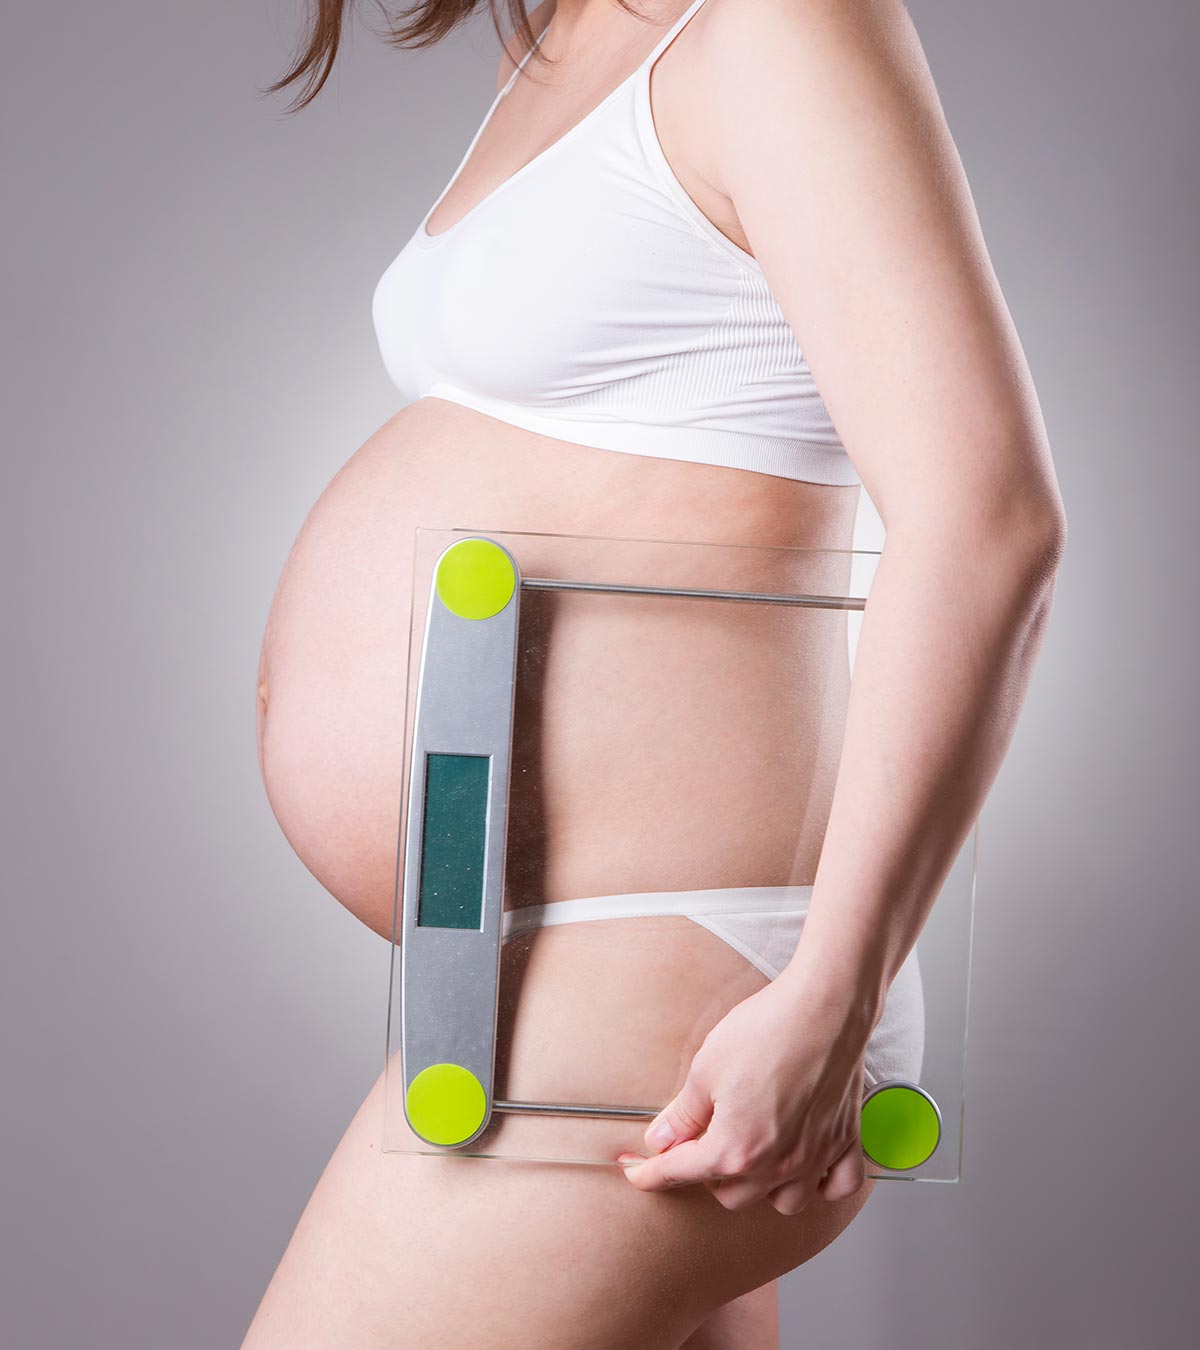 overweight of baby during pregnancy